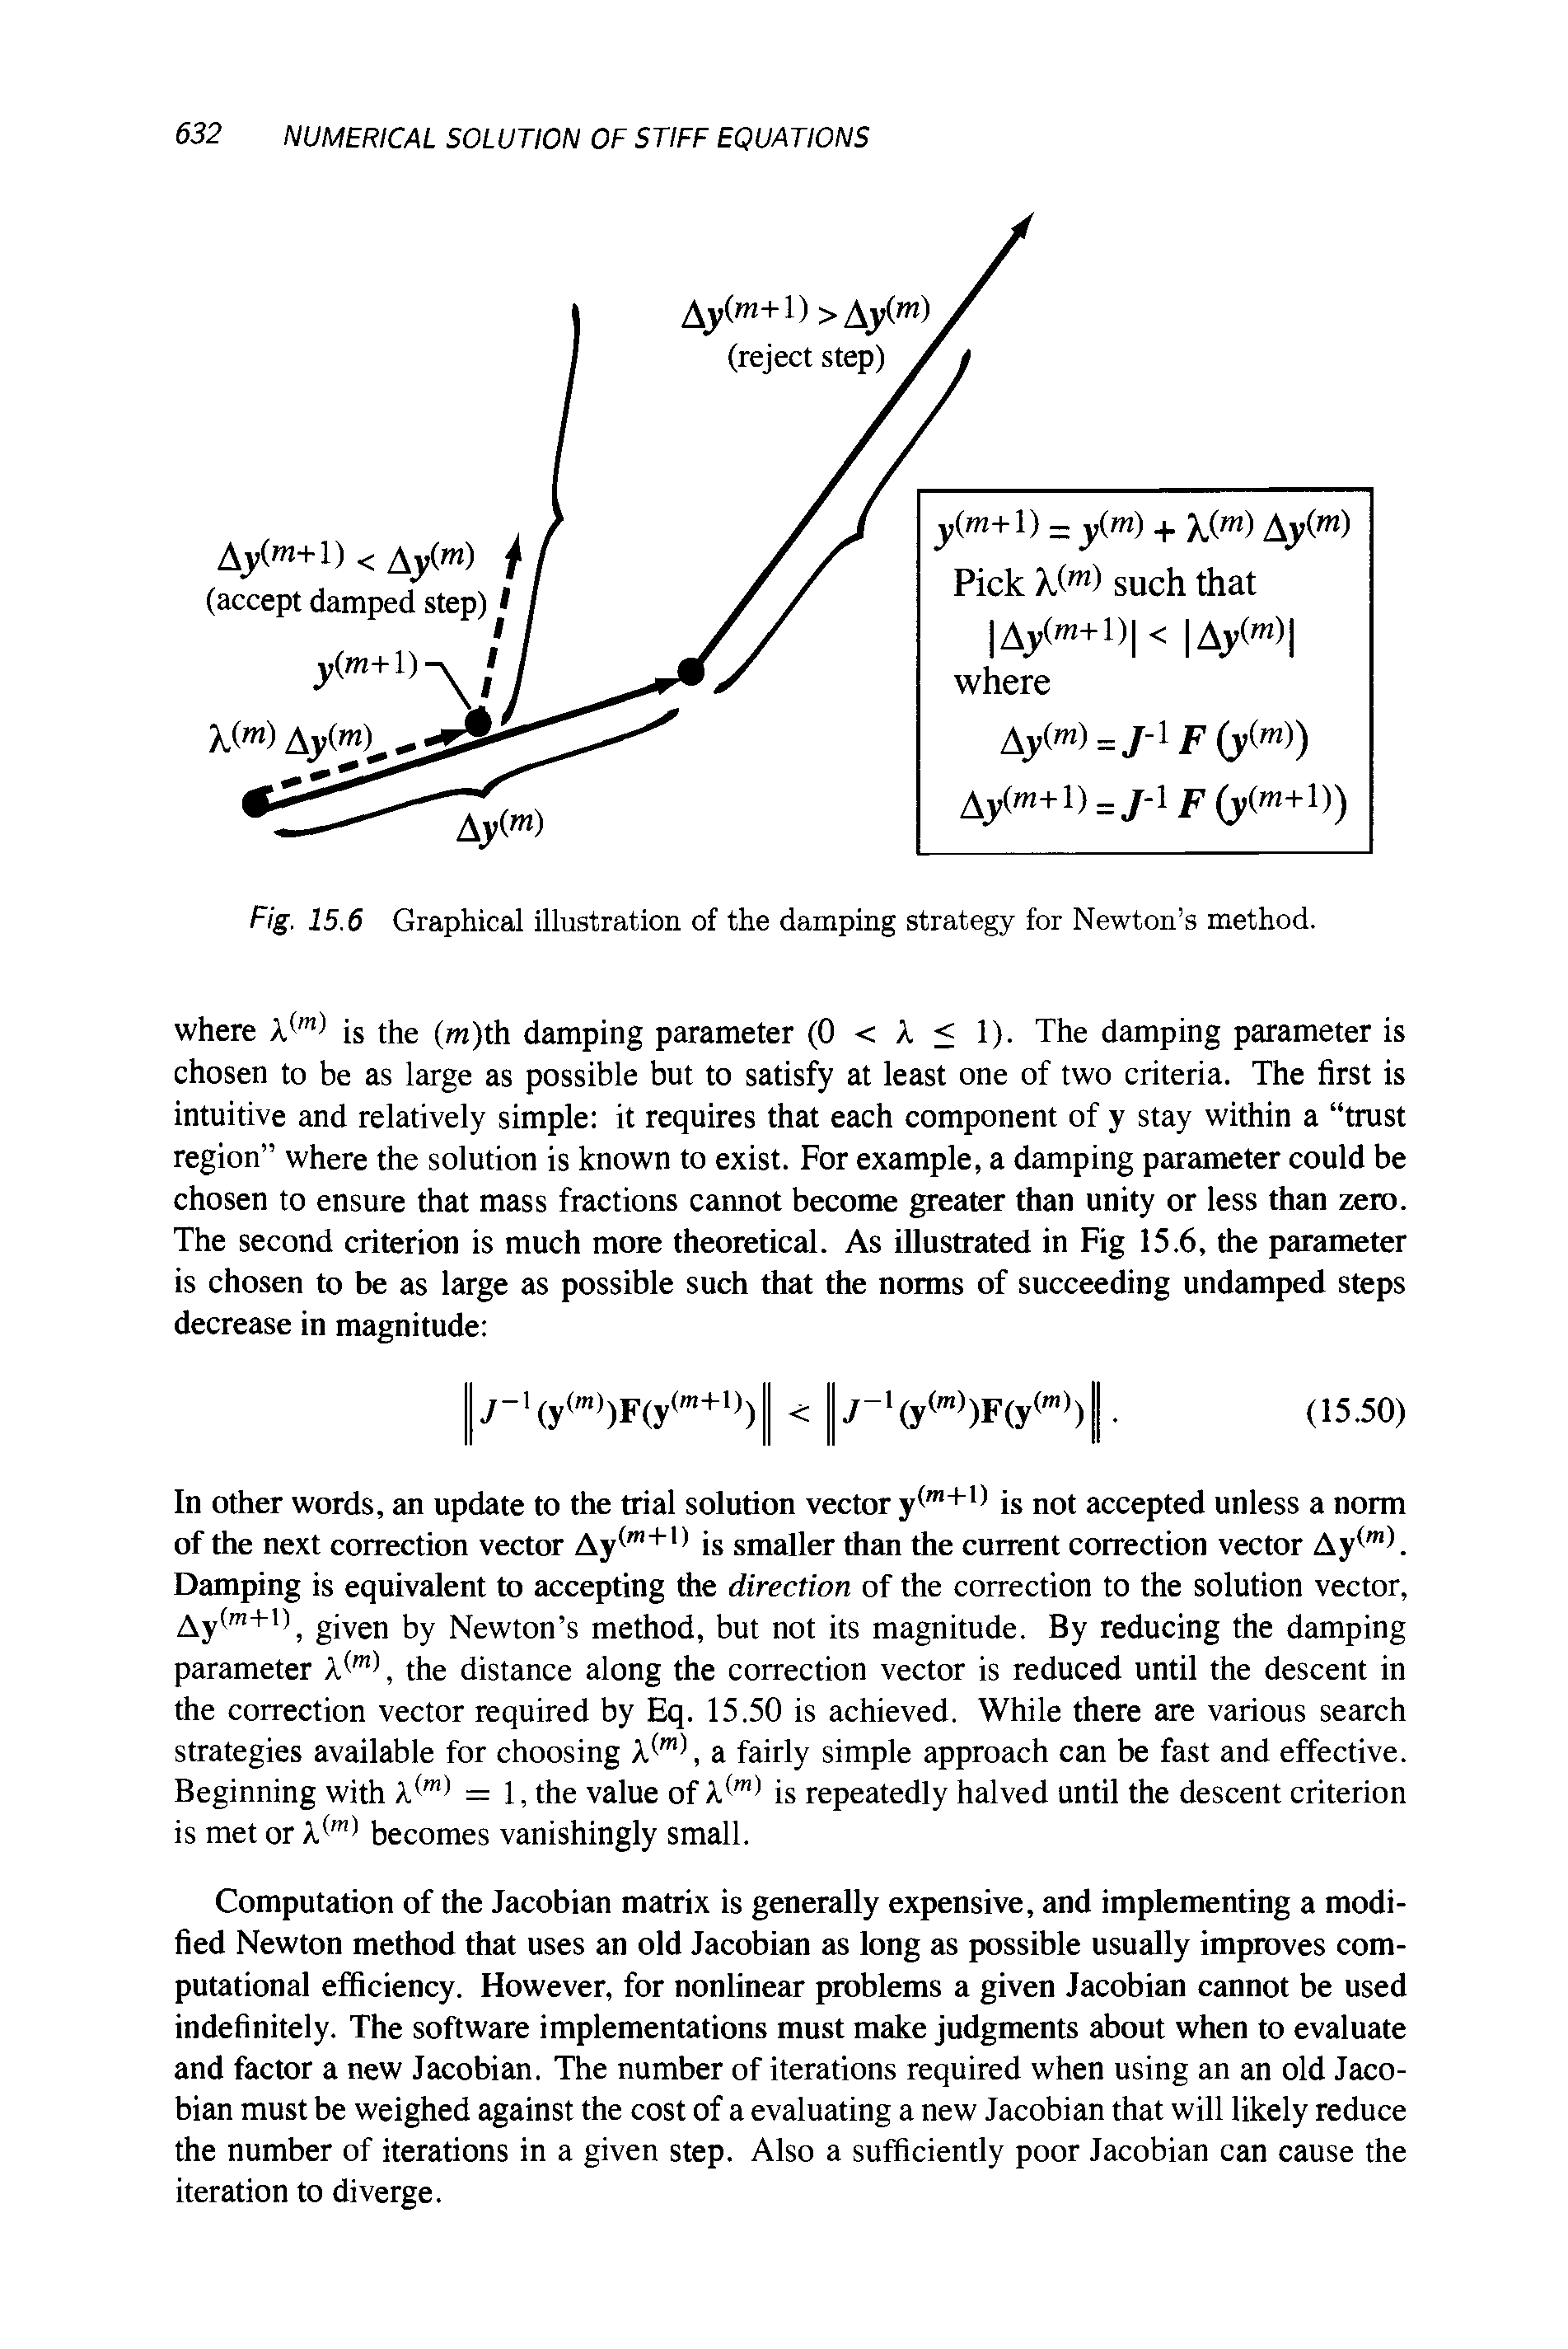 Fig. 15.6 Graphical illustration of the damping strategy for Newton s method.